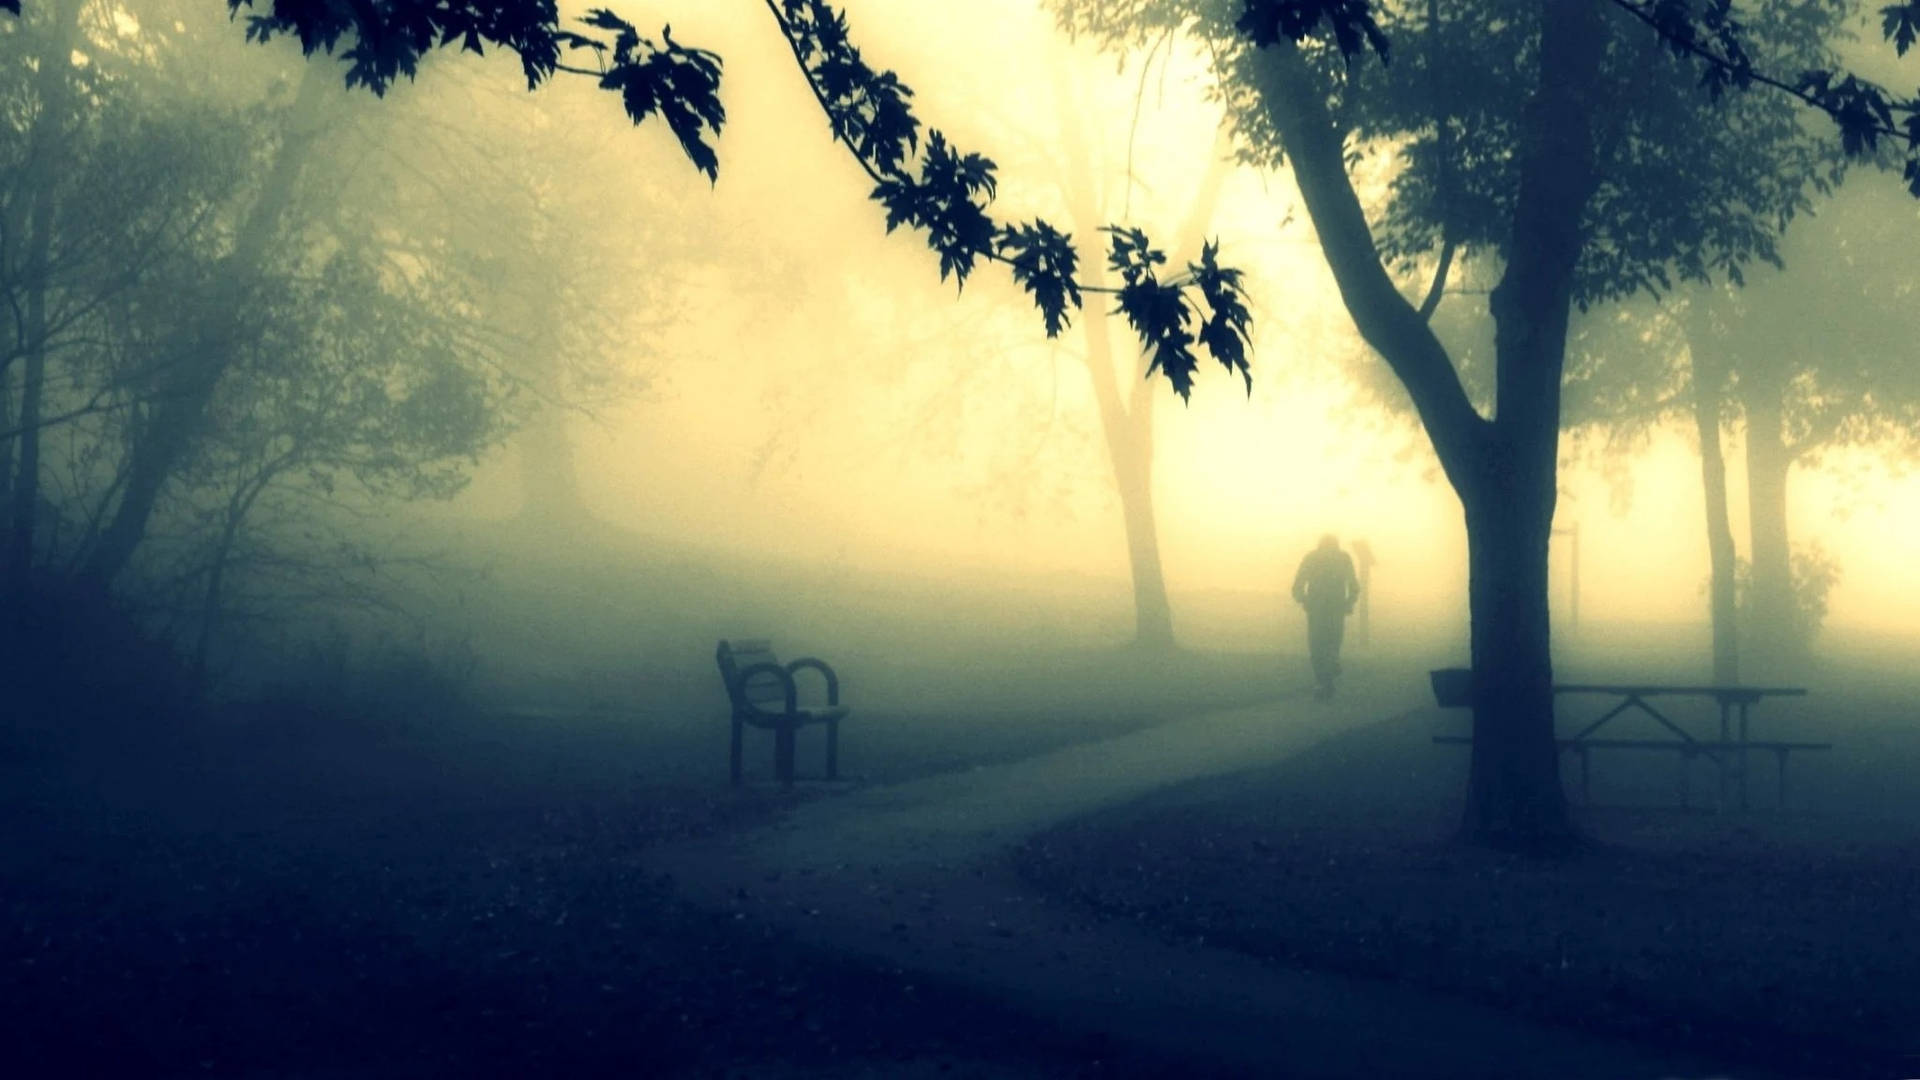 Mystery Man In The Park Digital Art Background